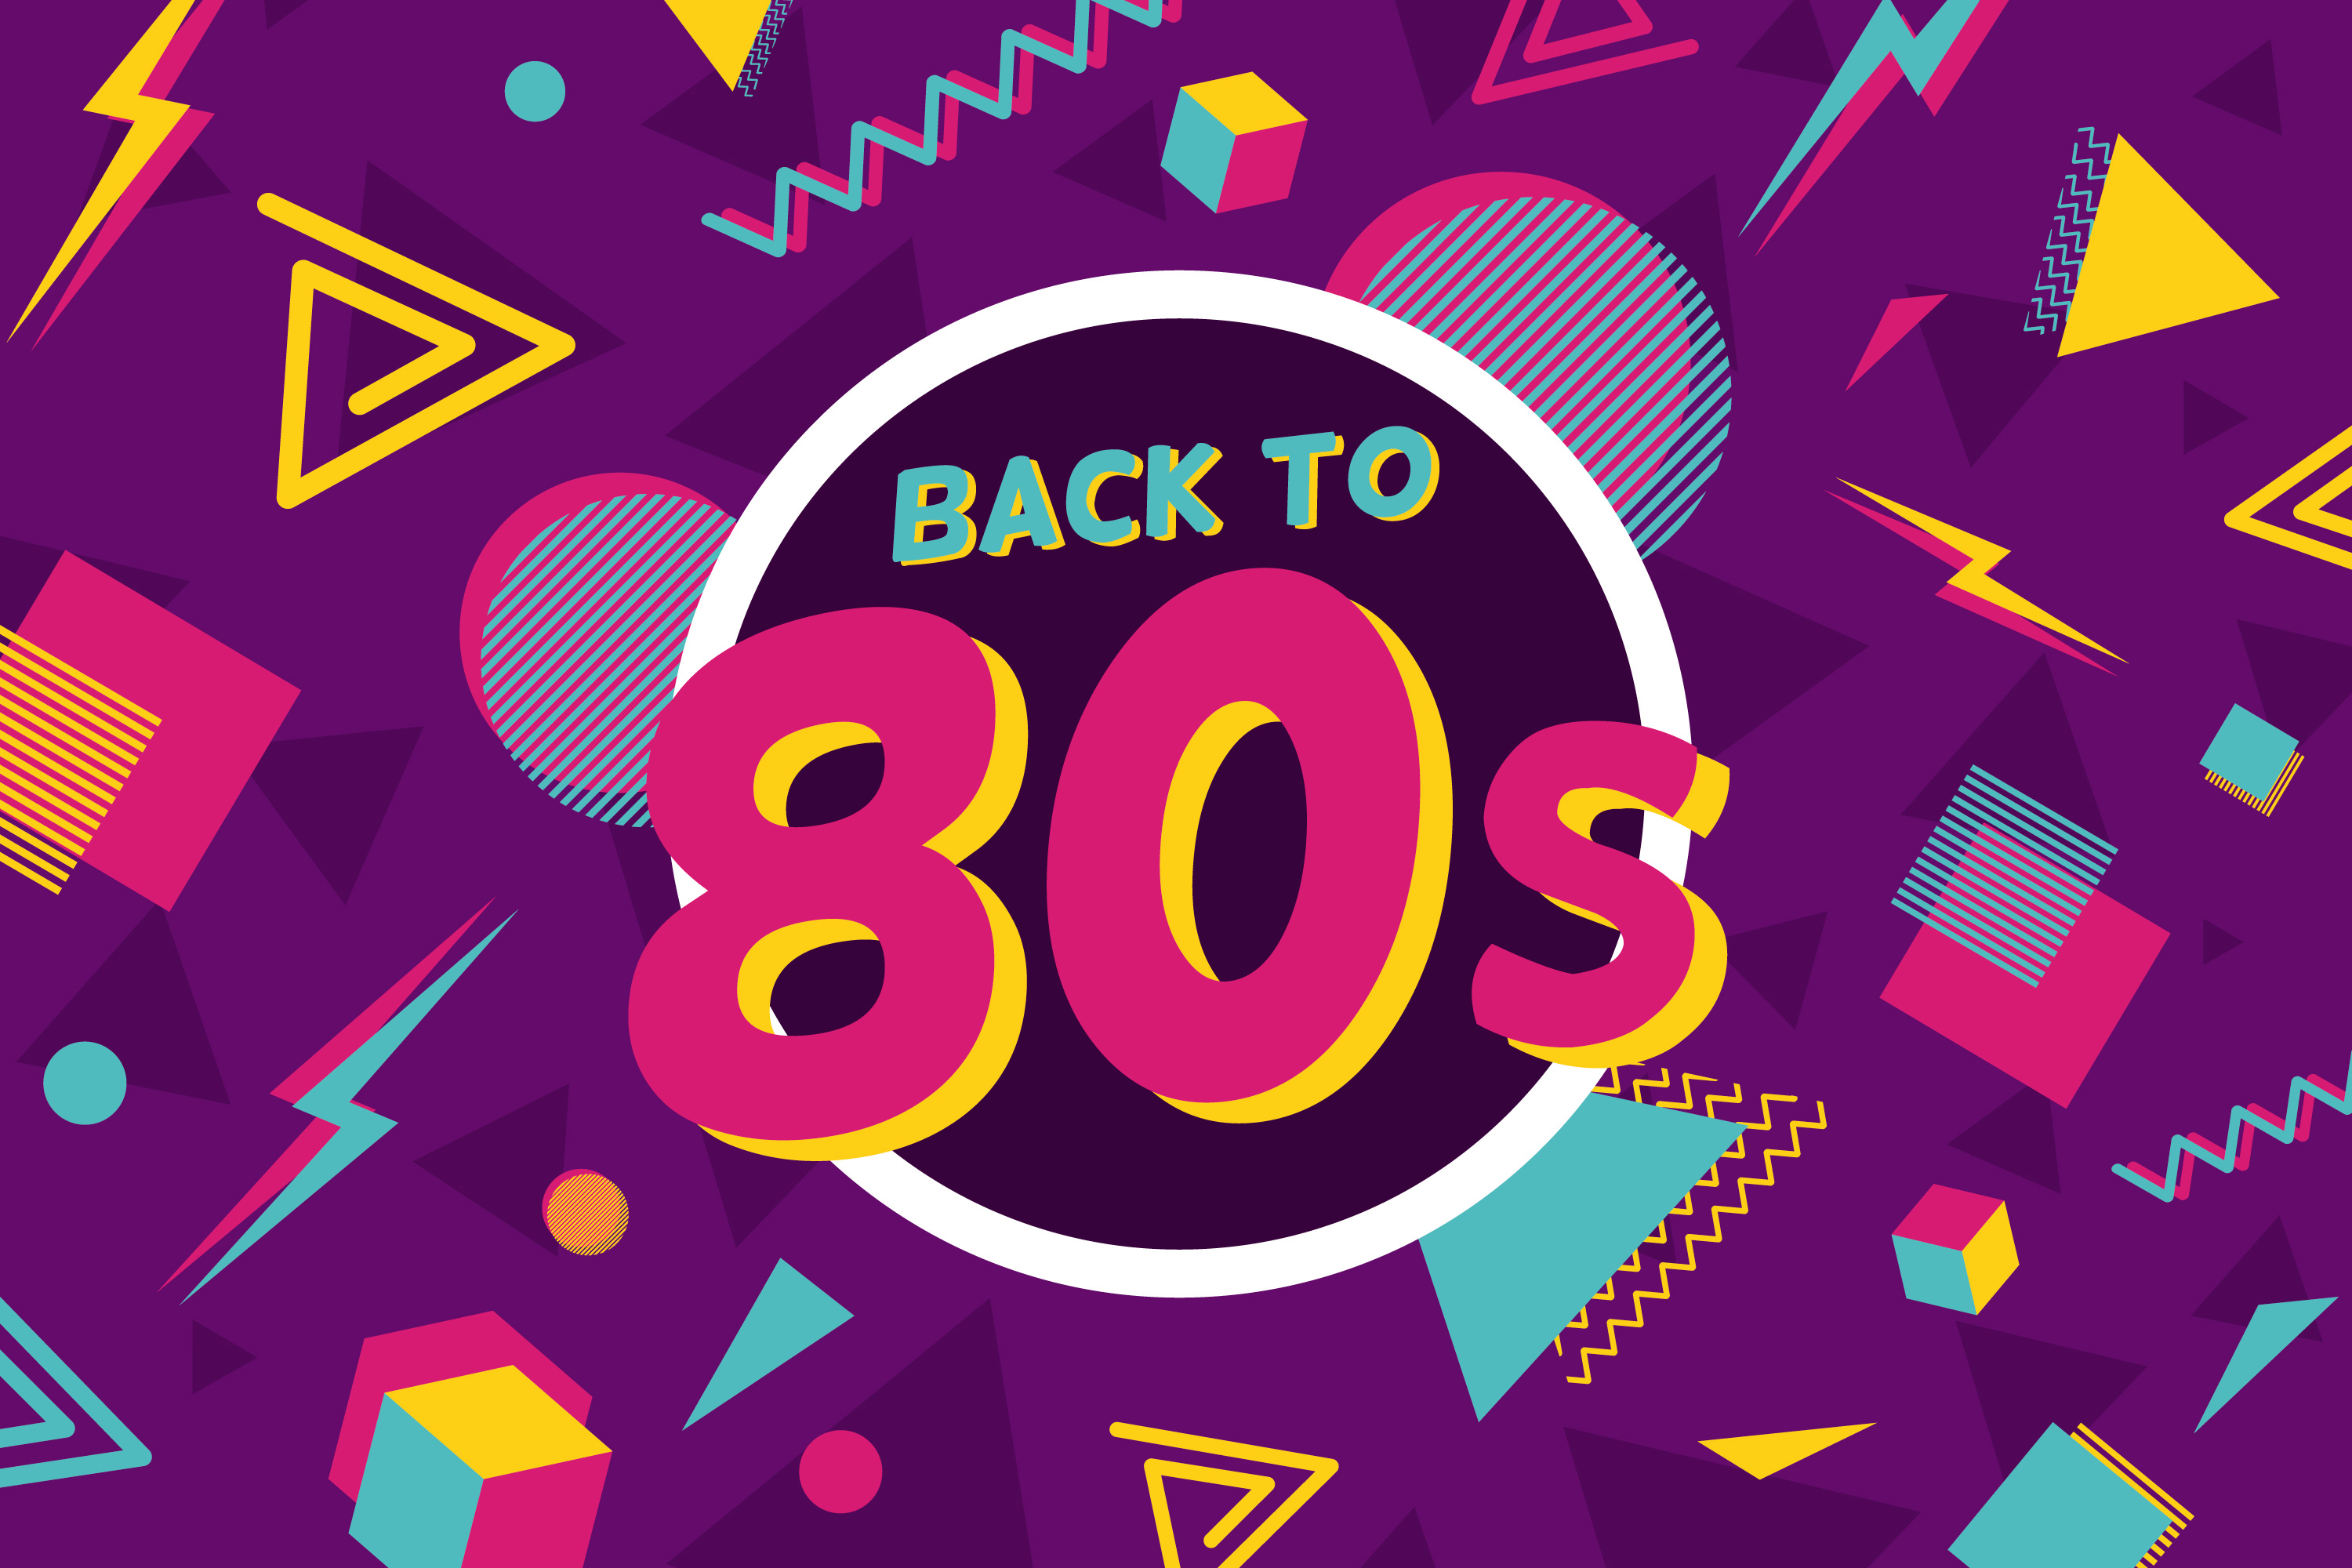 Back to the 80s spelled out in multicolors with a background of multicolored shapes and patterns. 